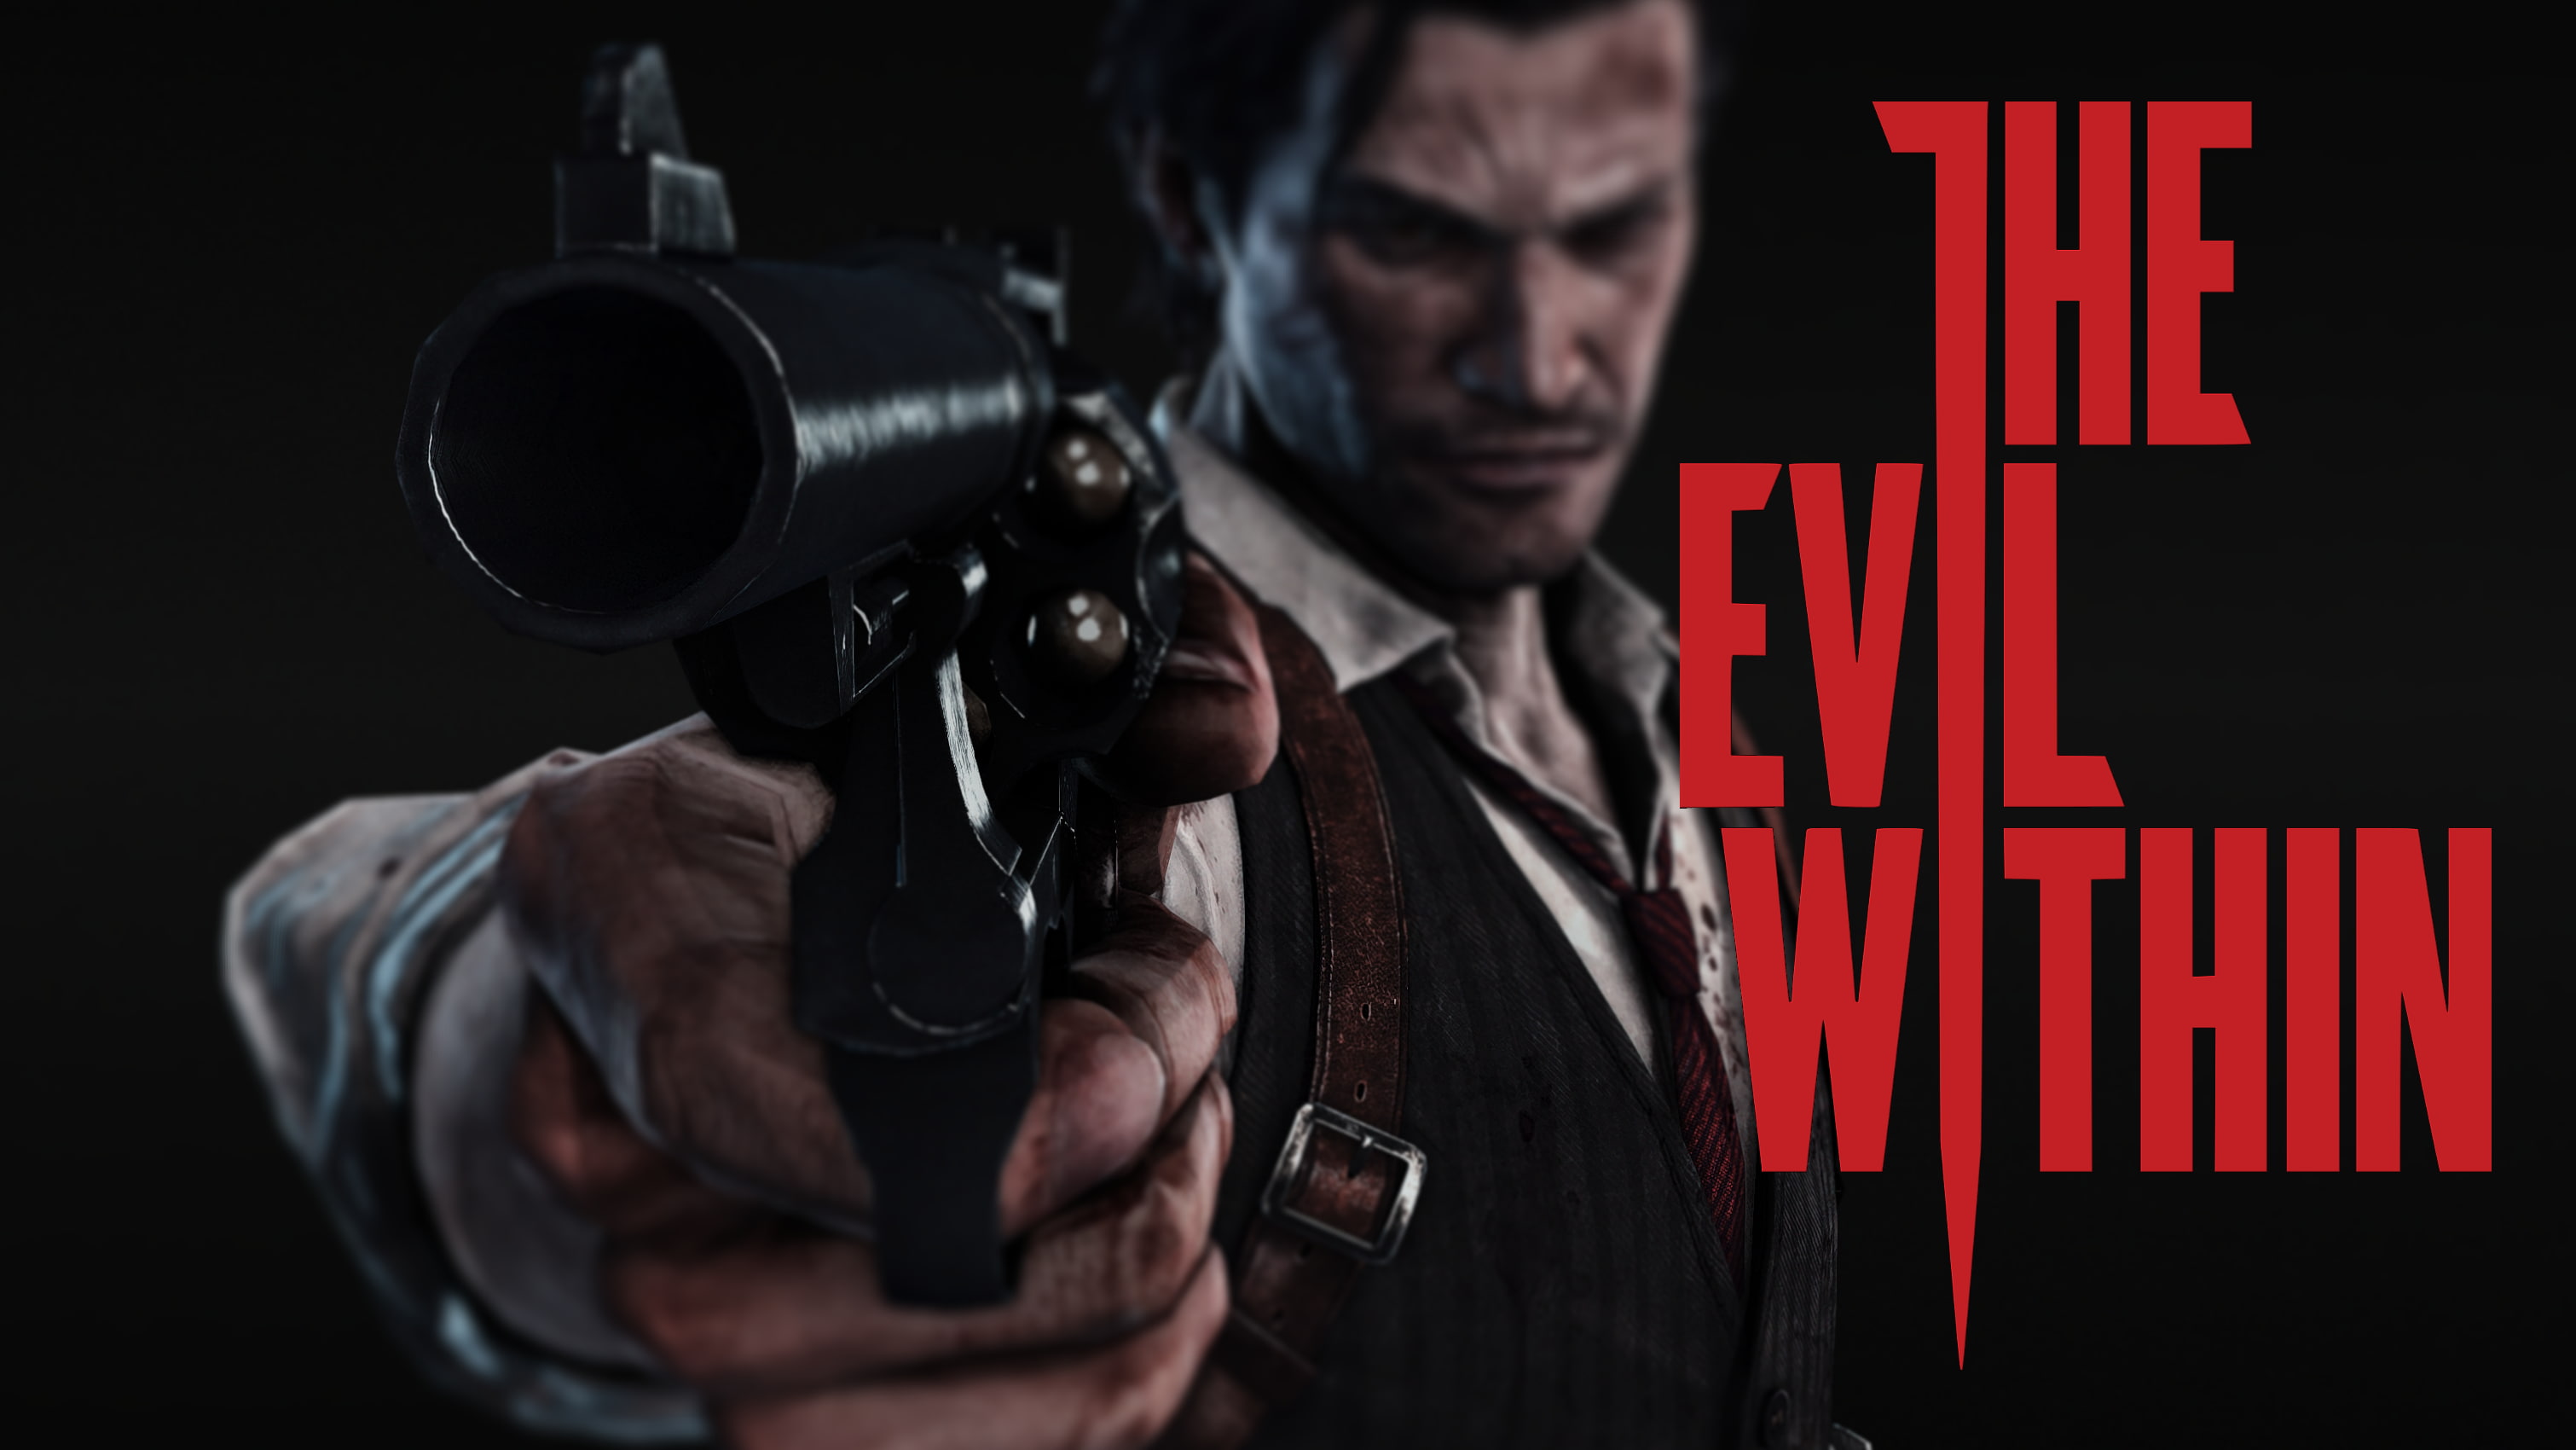 The Evil Within, horror, video games, communication, one person